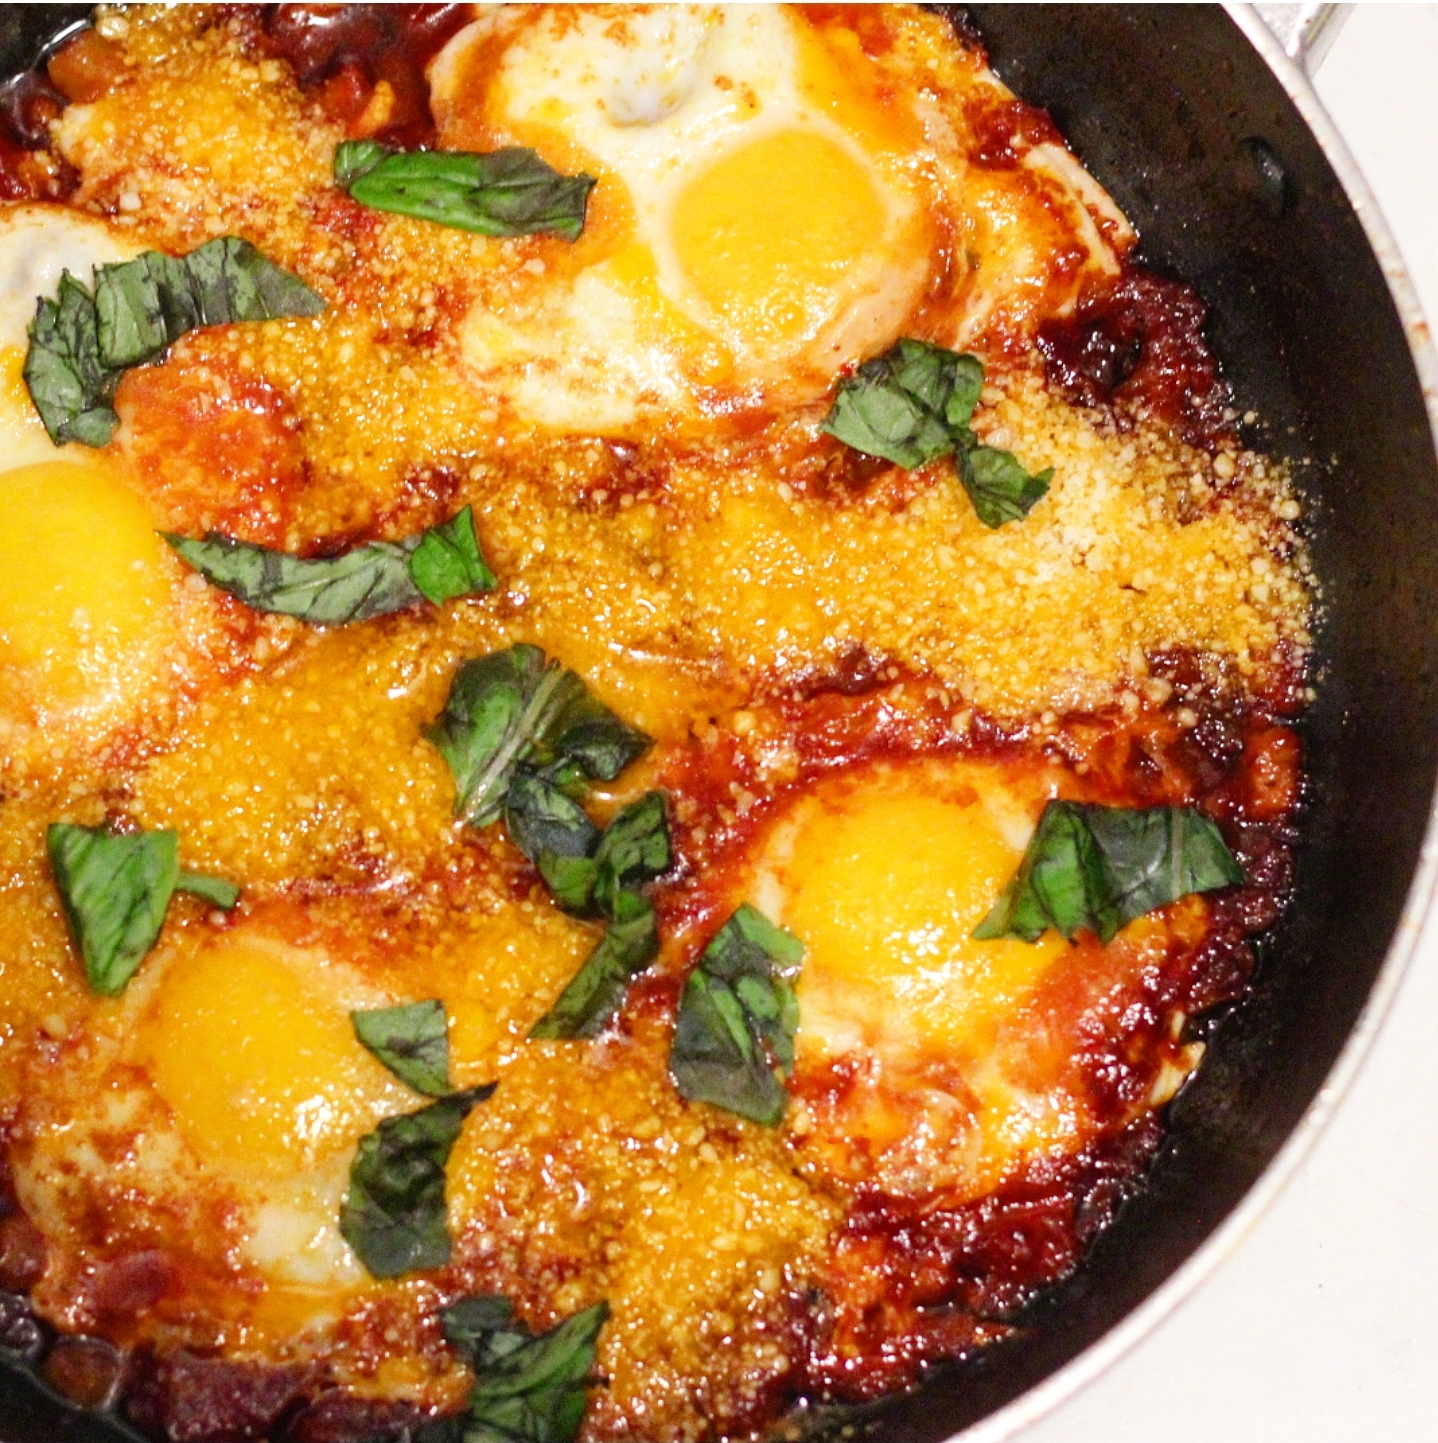 From My Kitchen: Eggs In Purgatory